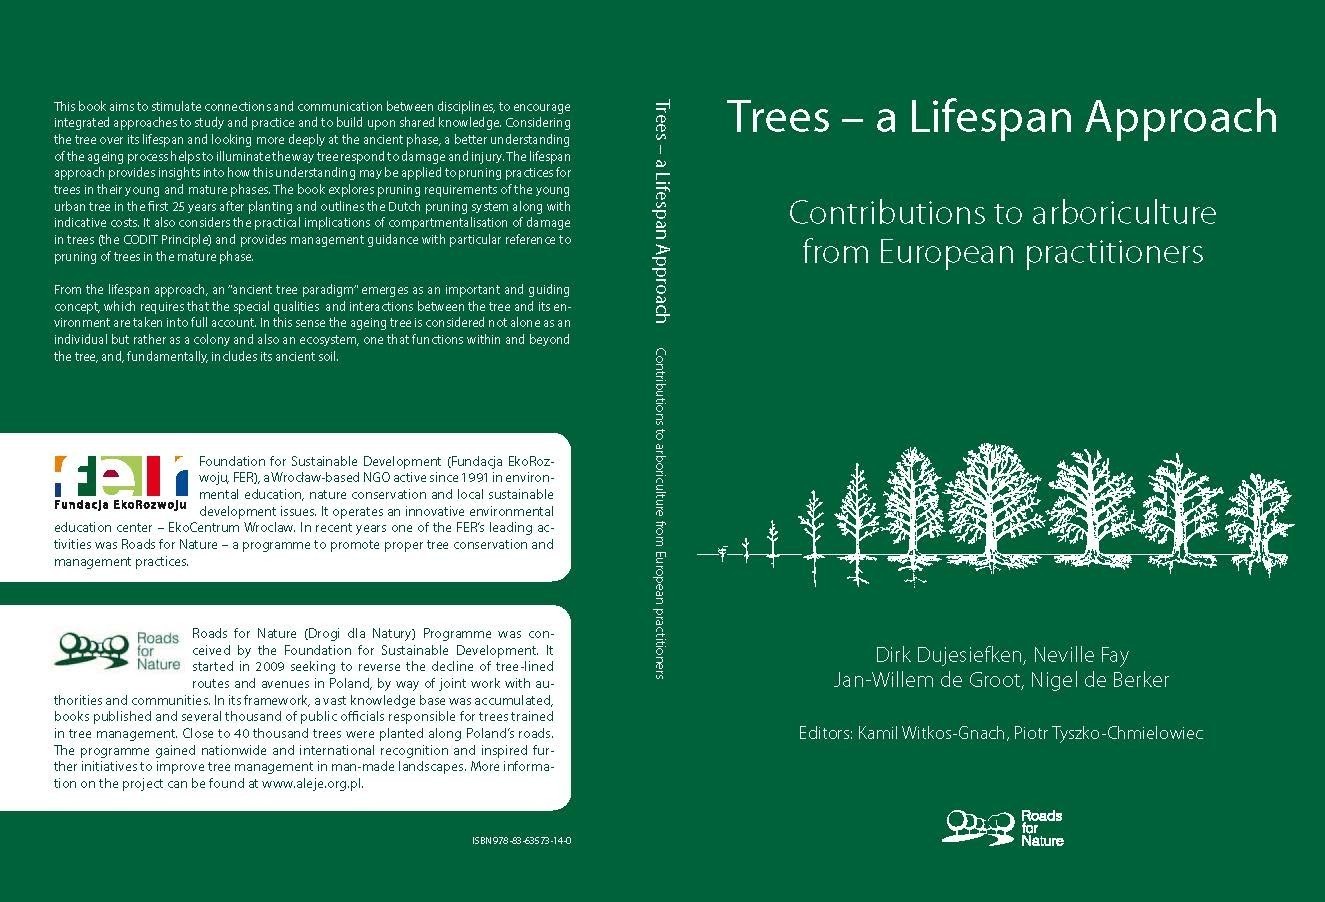 Trees: A Lifespan Approach